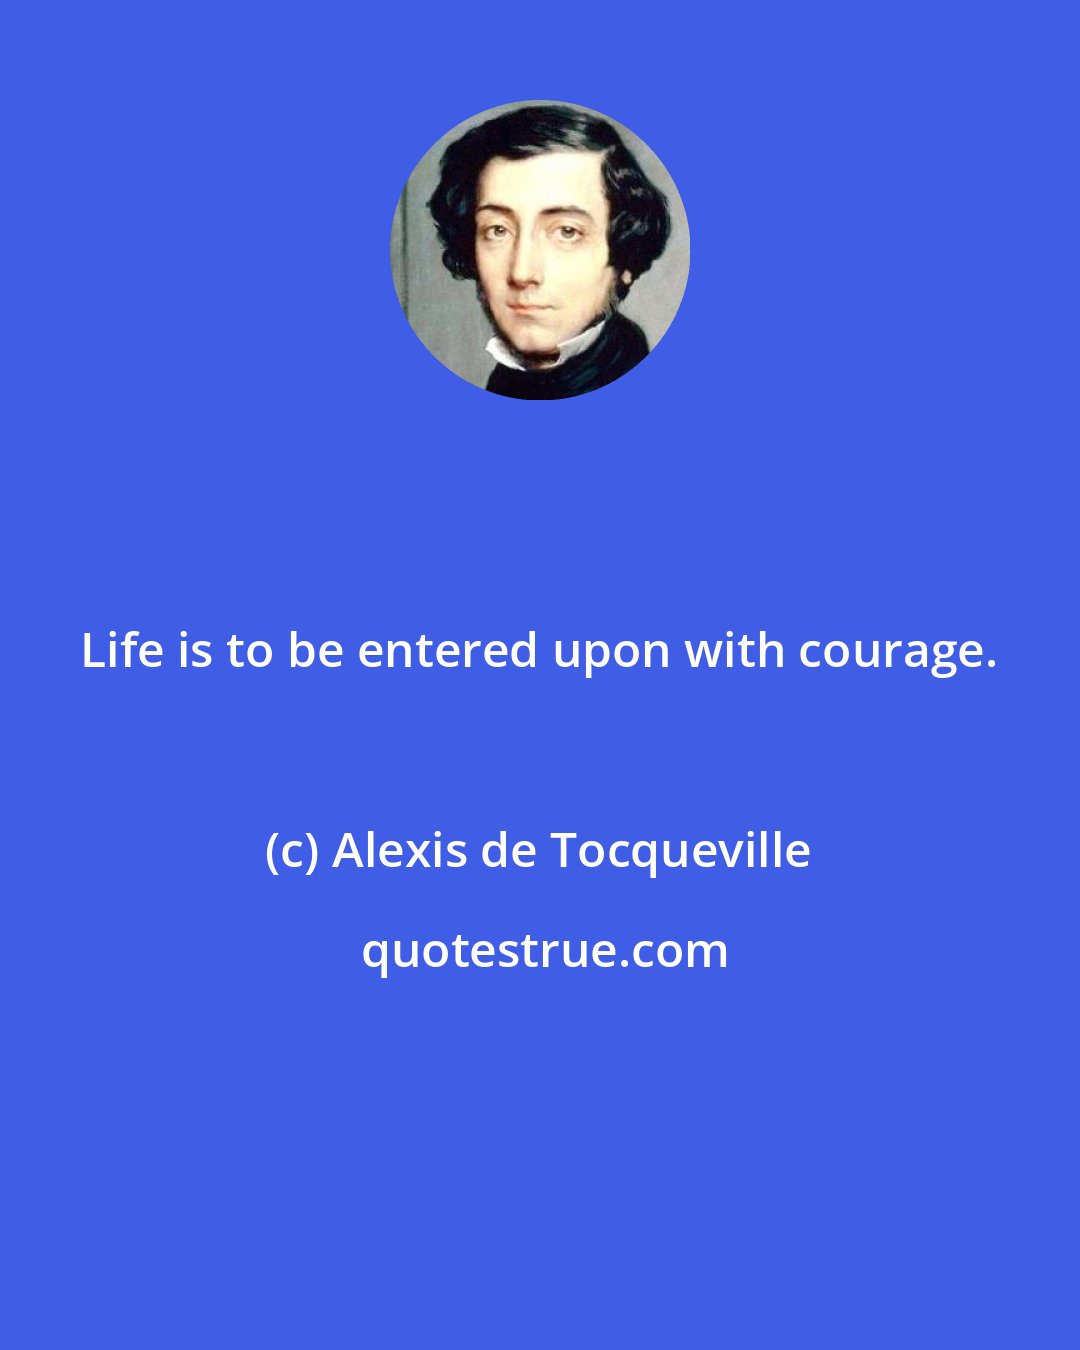 Alexis de Tocqueville: Life is to be entered upon with courage.